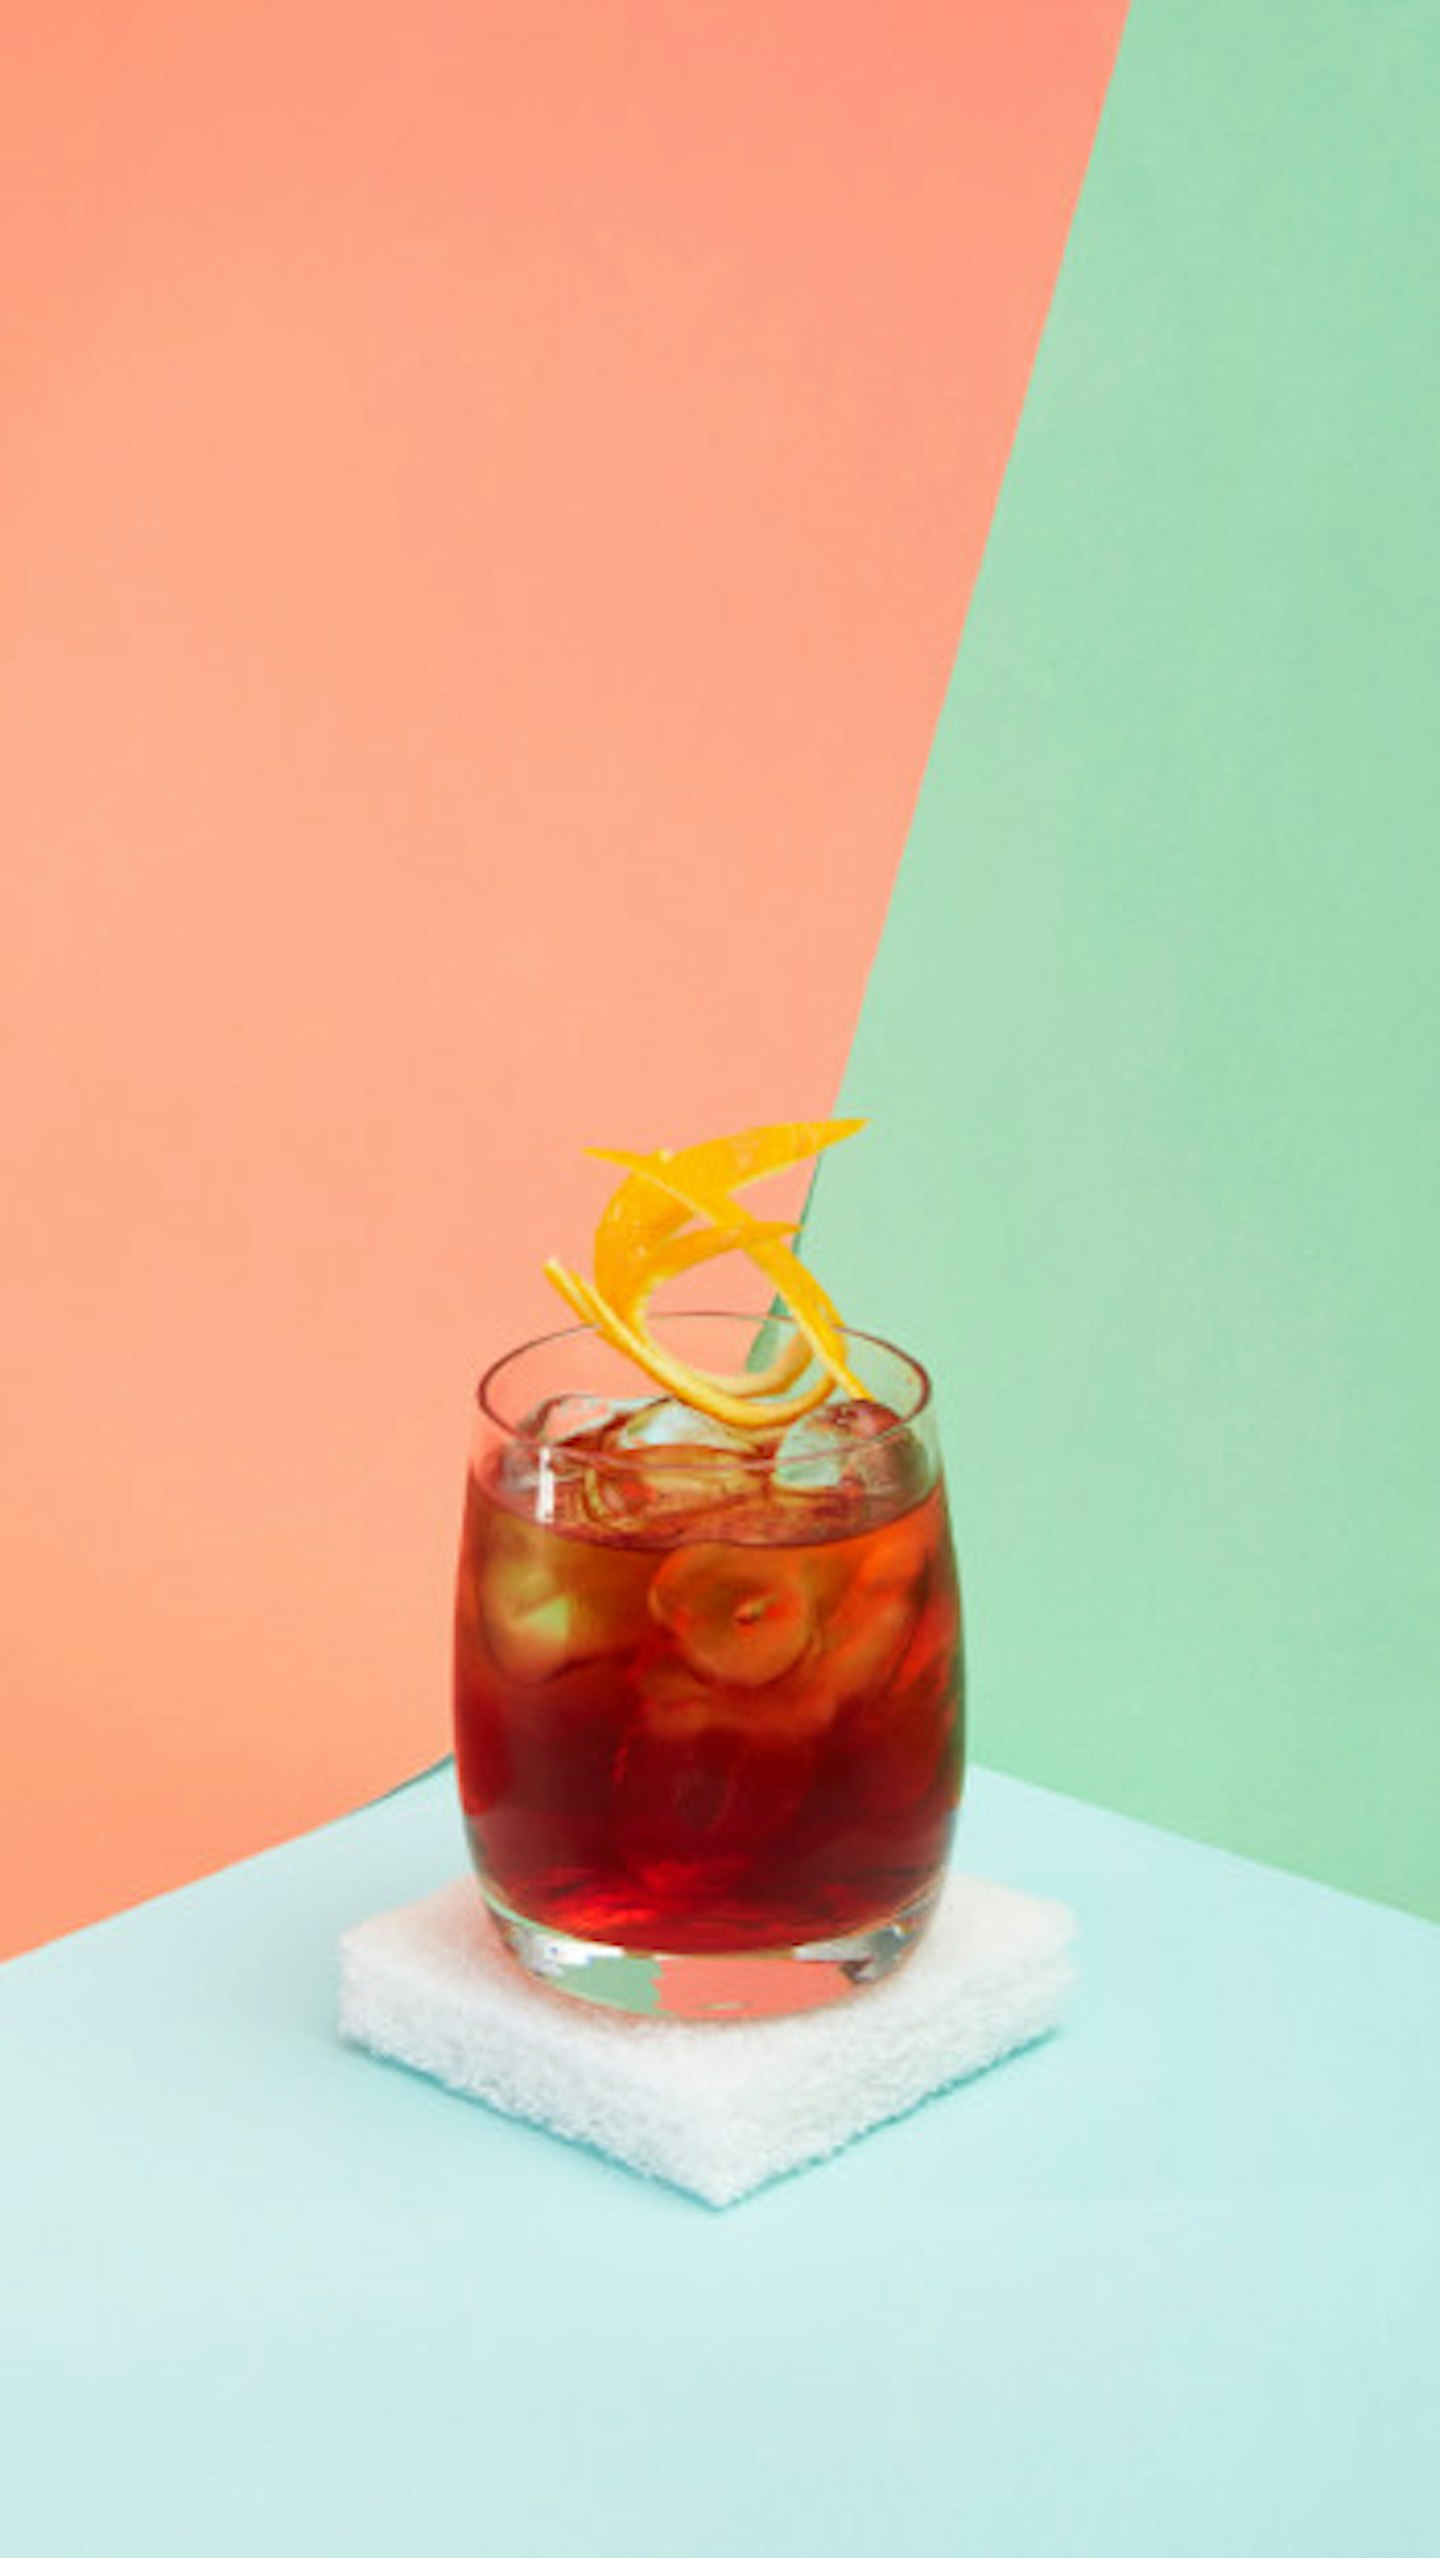 The Strong One - The Negroni Sbagliato